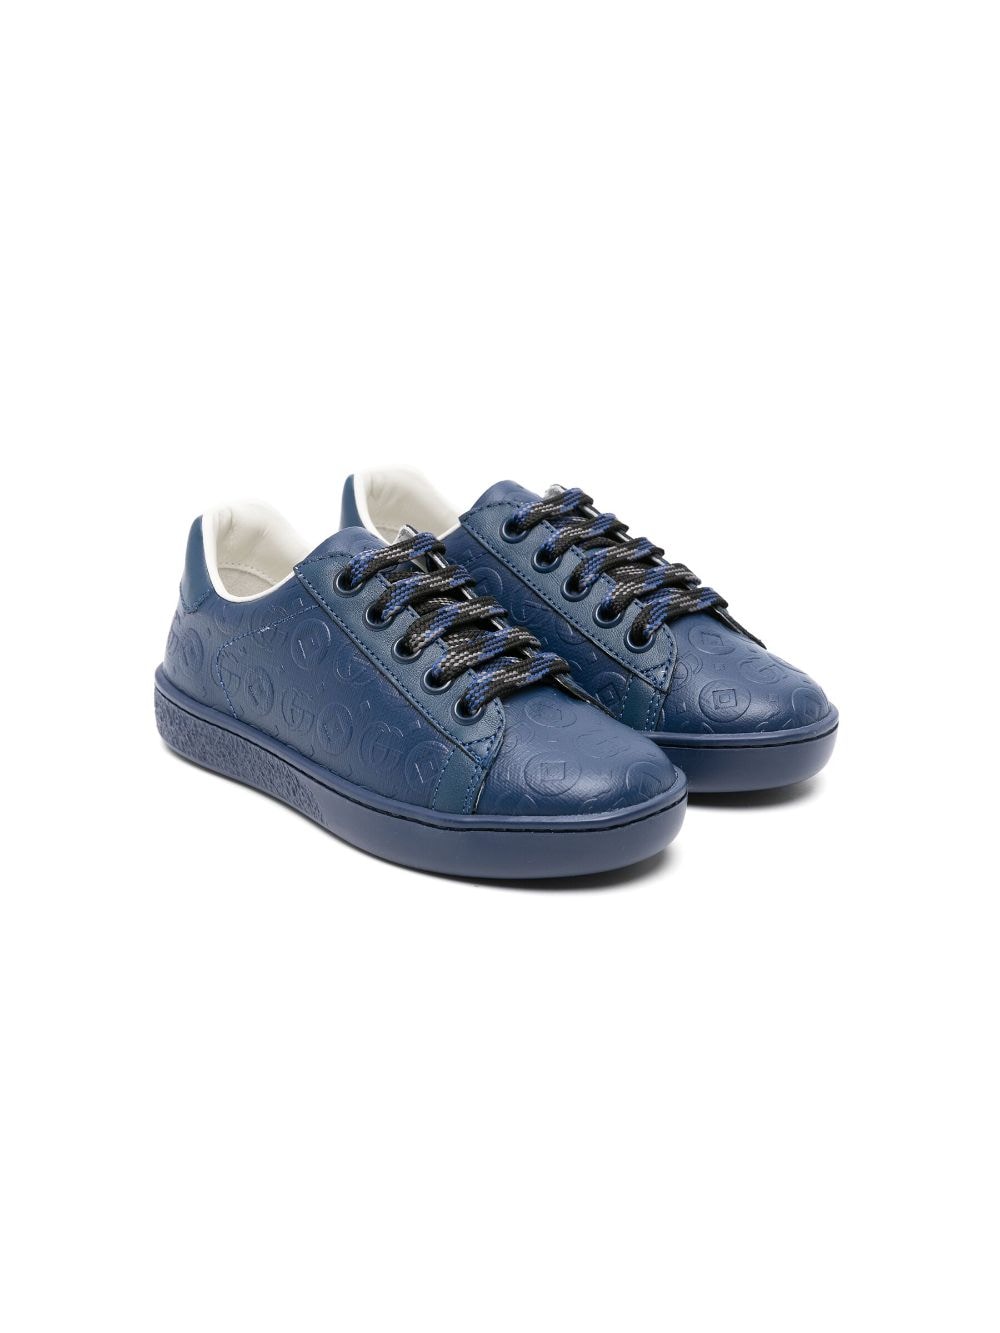 Gucci Kids Ace leather sneakers - Blue von Gucci Kids